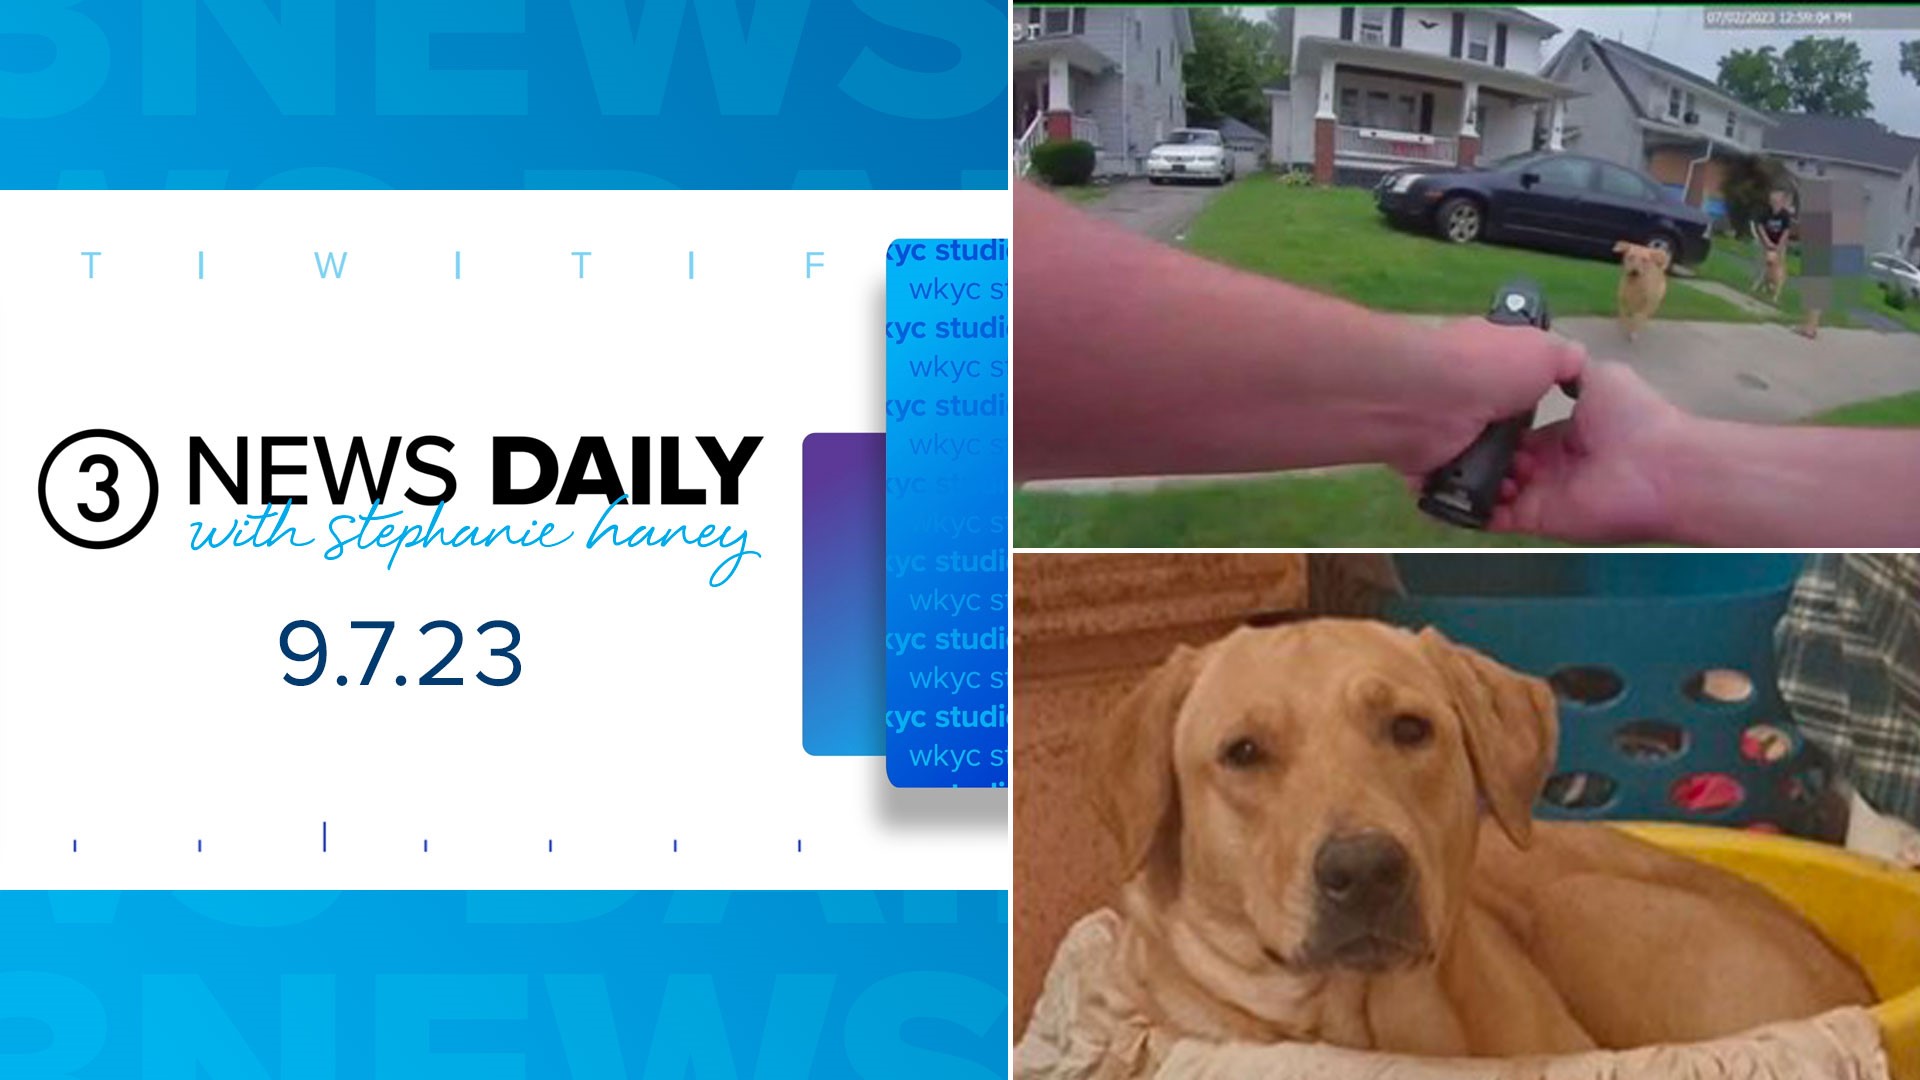 The results are in from the review of the Lorain police officer who shot and killed a Labrador named Dixie in June.